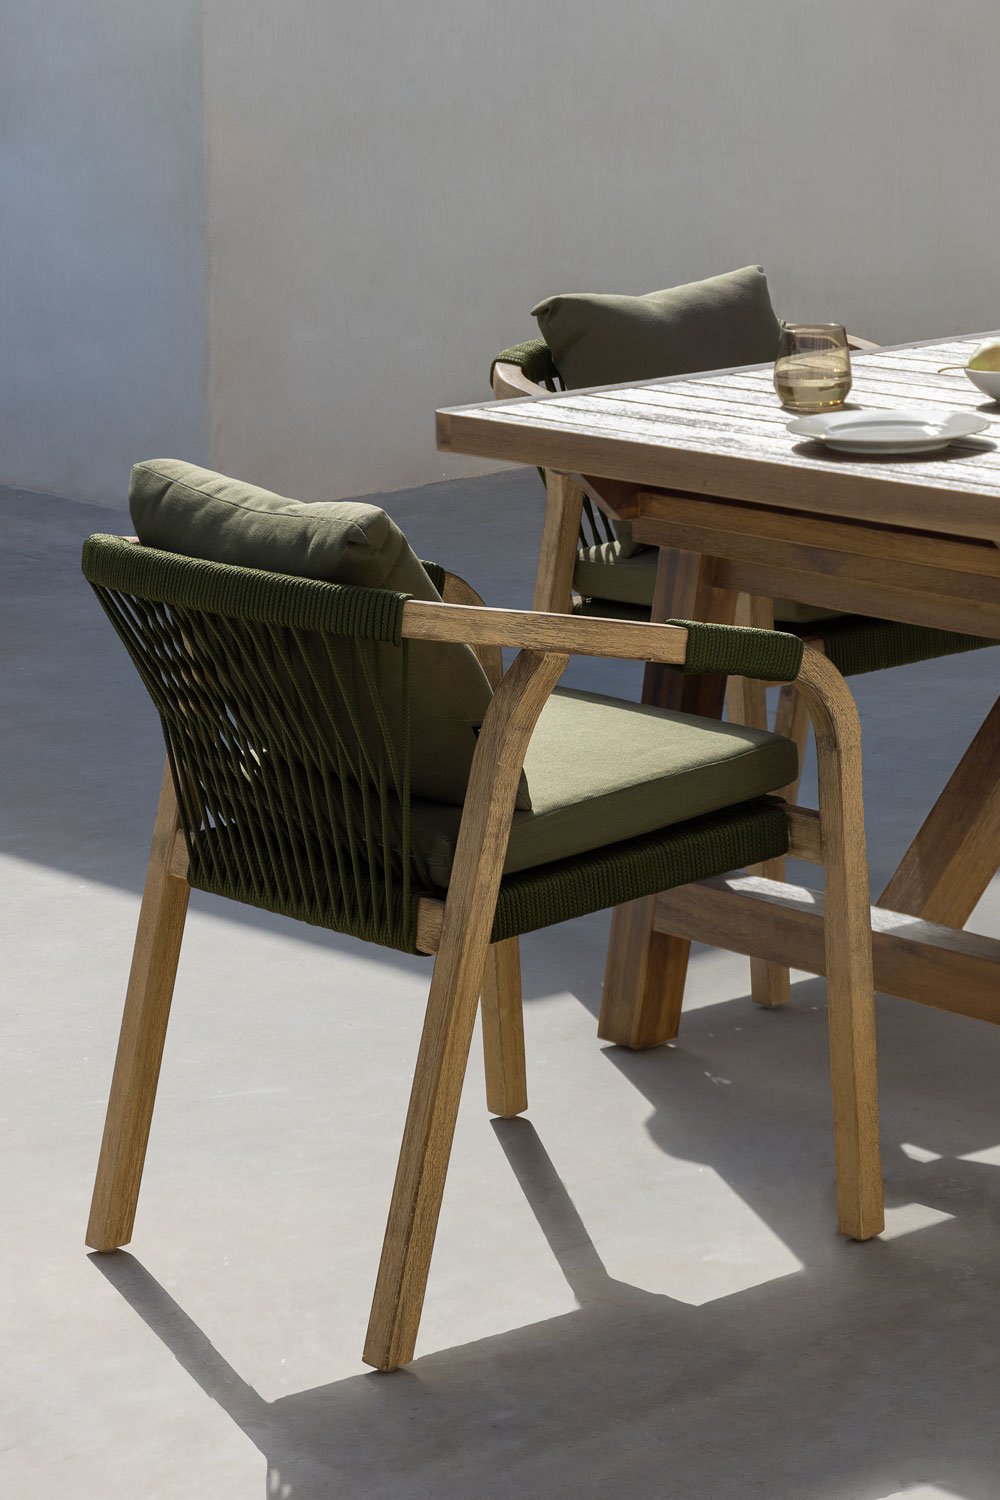 Acacia Wood Garden Chair with Armrests Dubai, gallery image 1